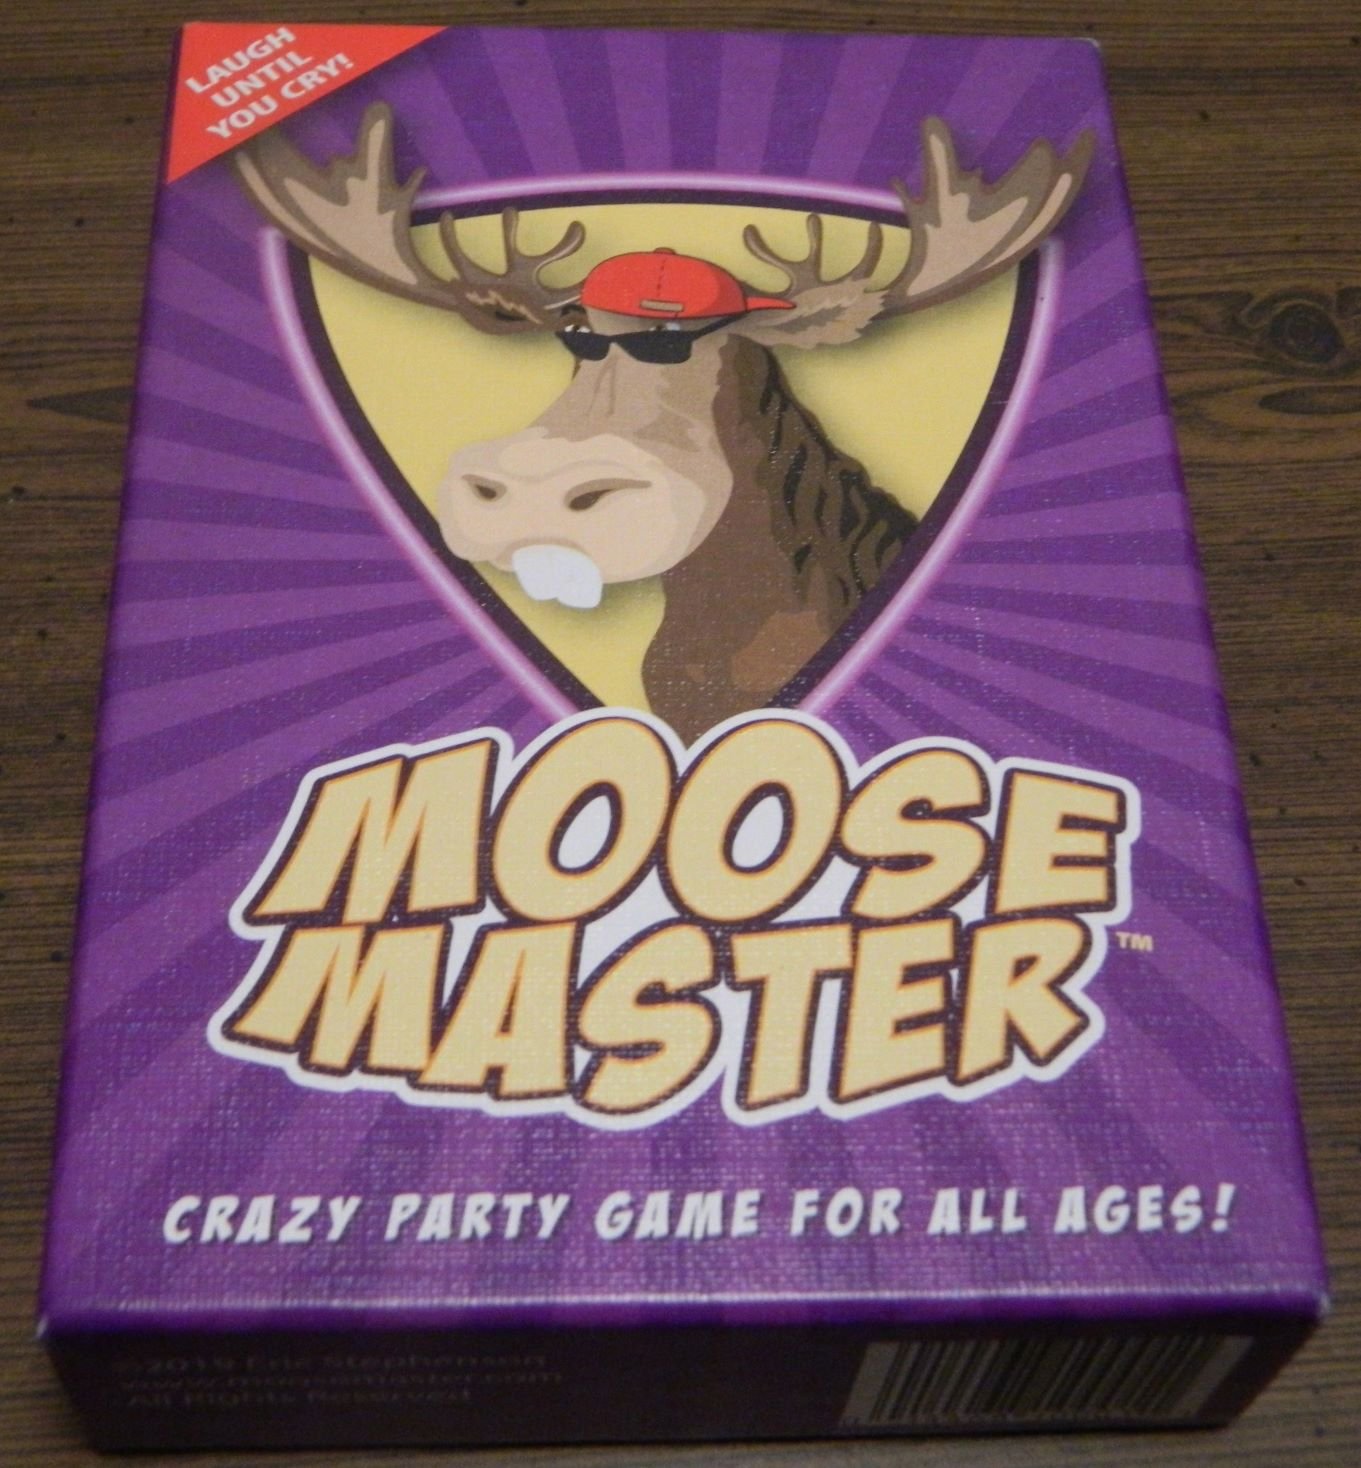 Box for Moose Master